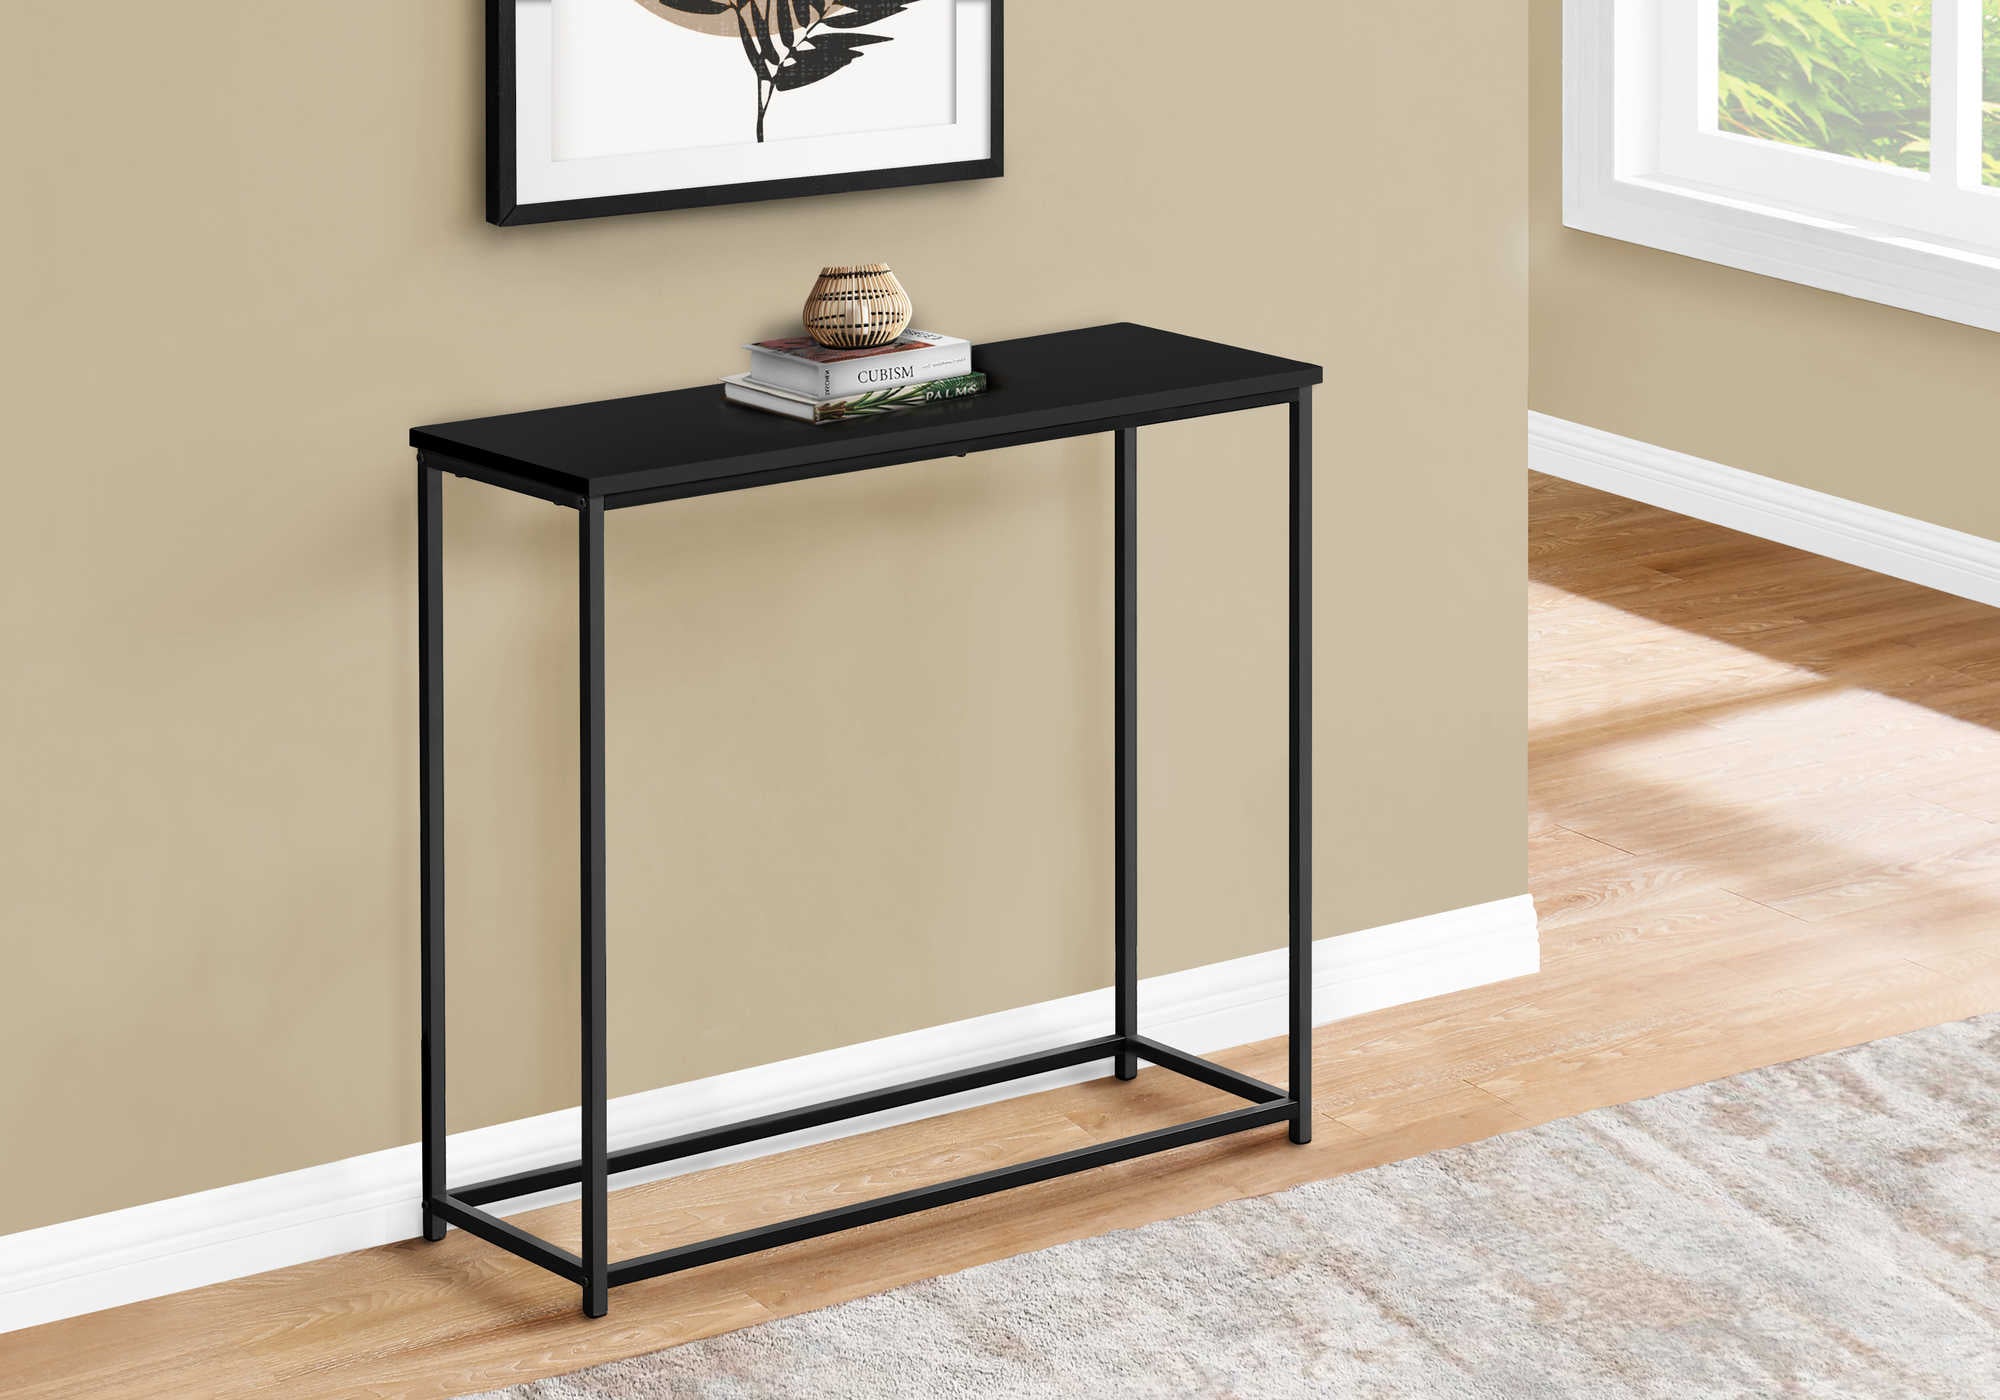 I 2250 - ACCENT / CONSOLE TABLE - 32"L / BLACK / BLACK METAL HALL CONSOLE BY MONARCH SPECIALTIES